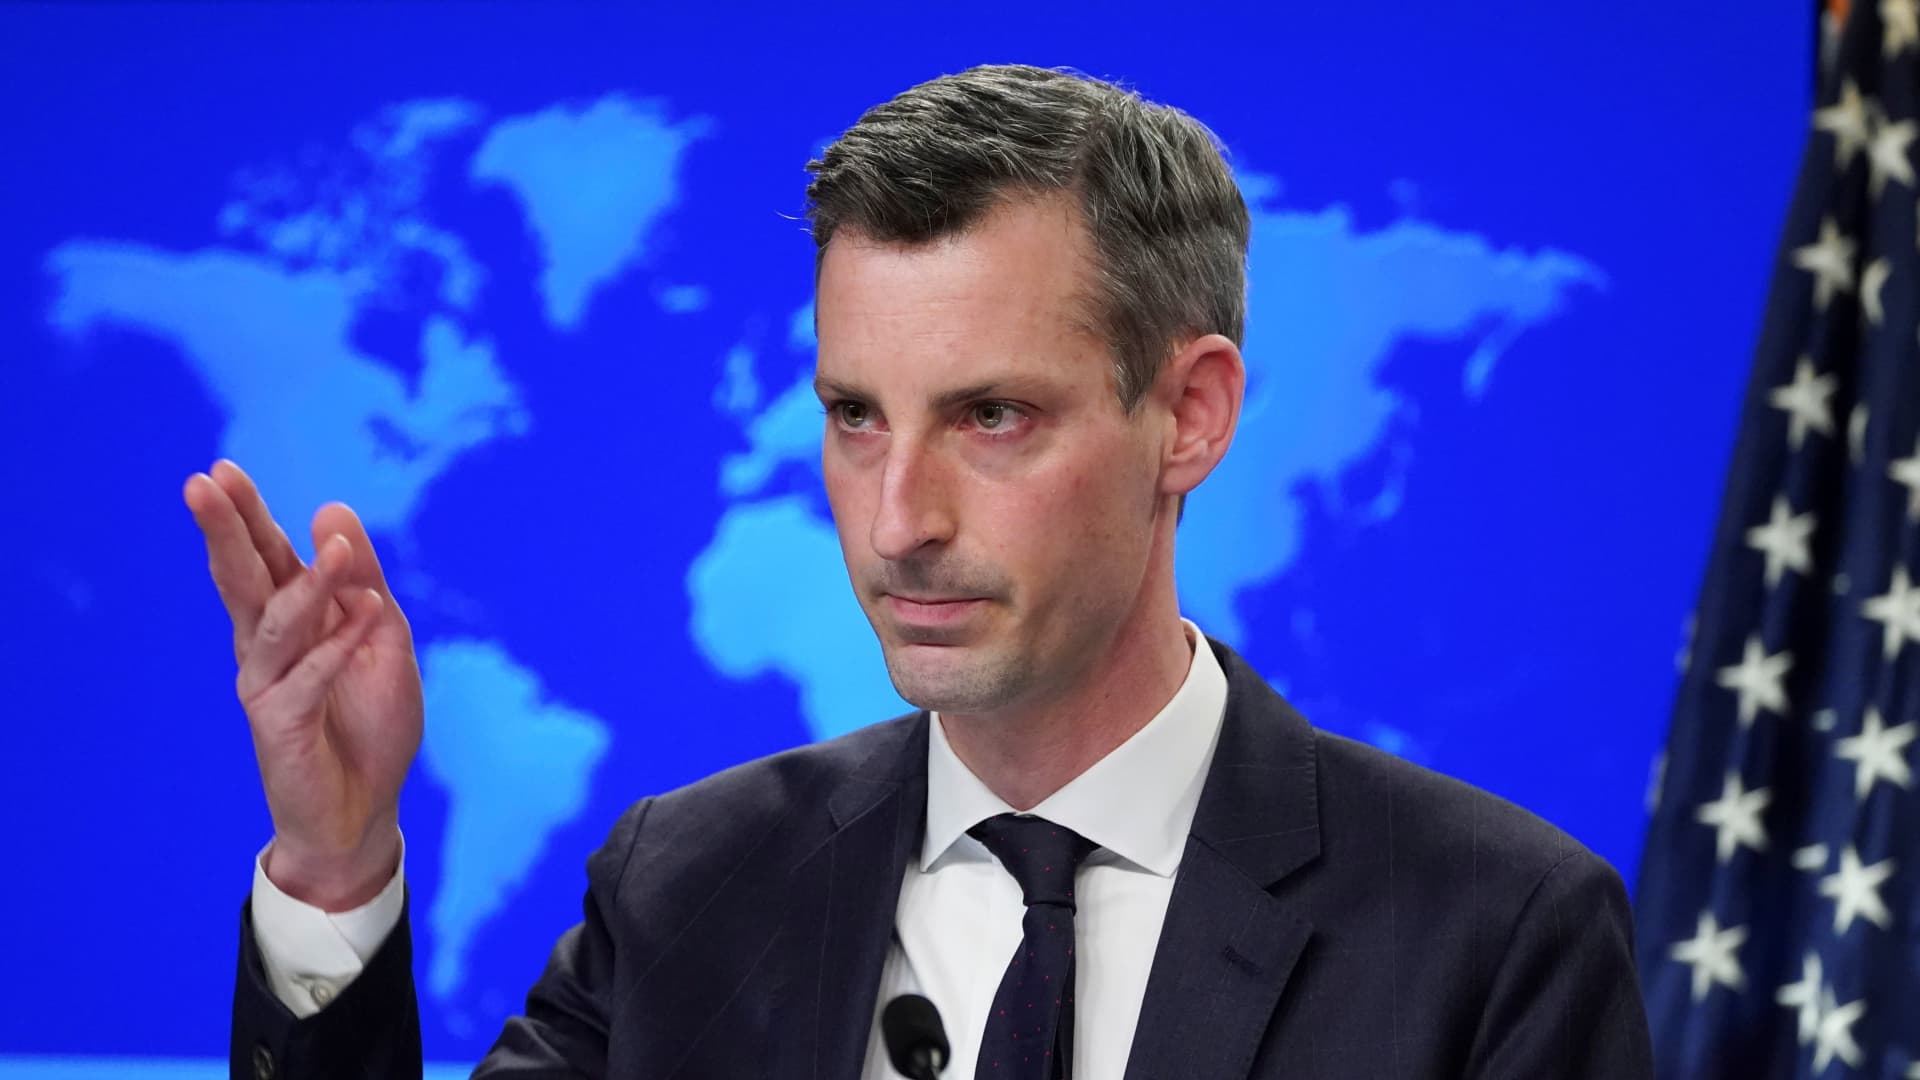 U.S. State Department Spokesman Ned Price speaks during a news briefing at the State Department in Washington, U.S., February 8, 2021.